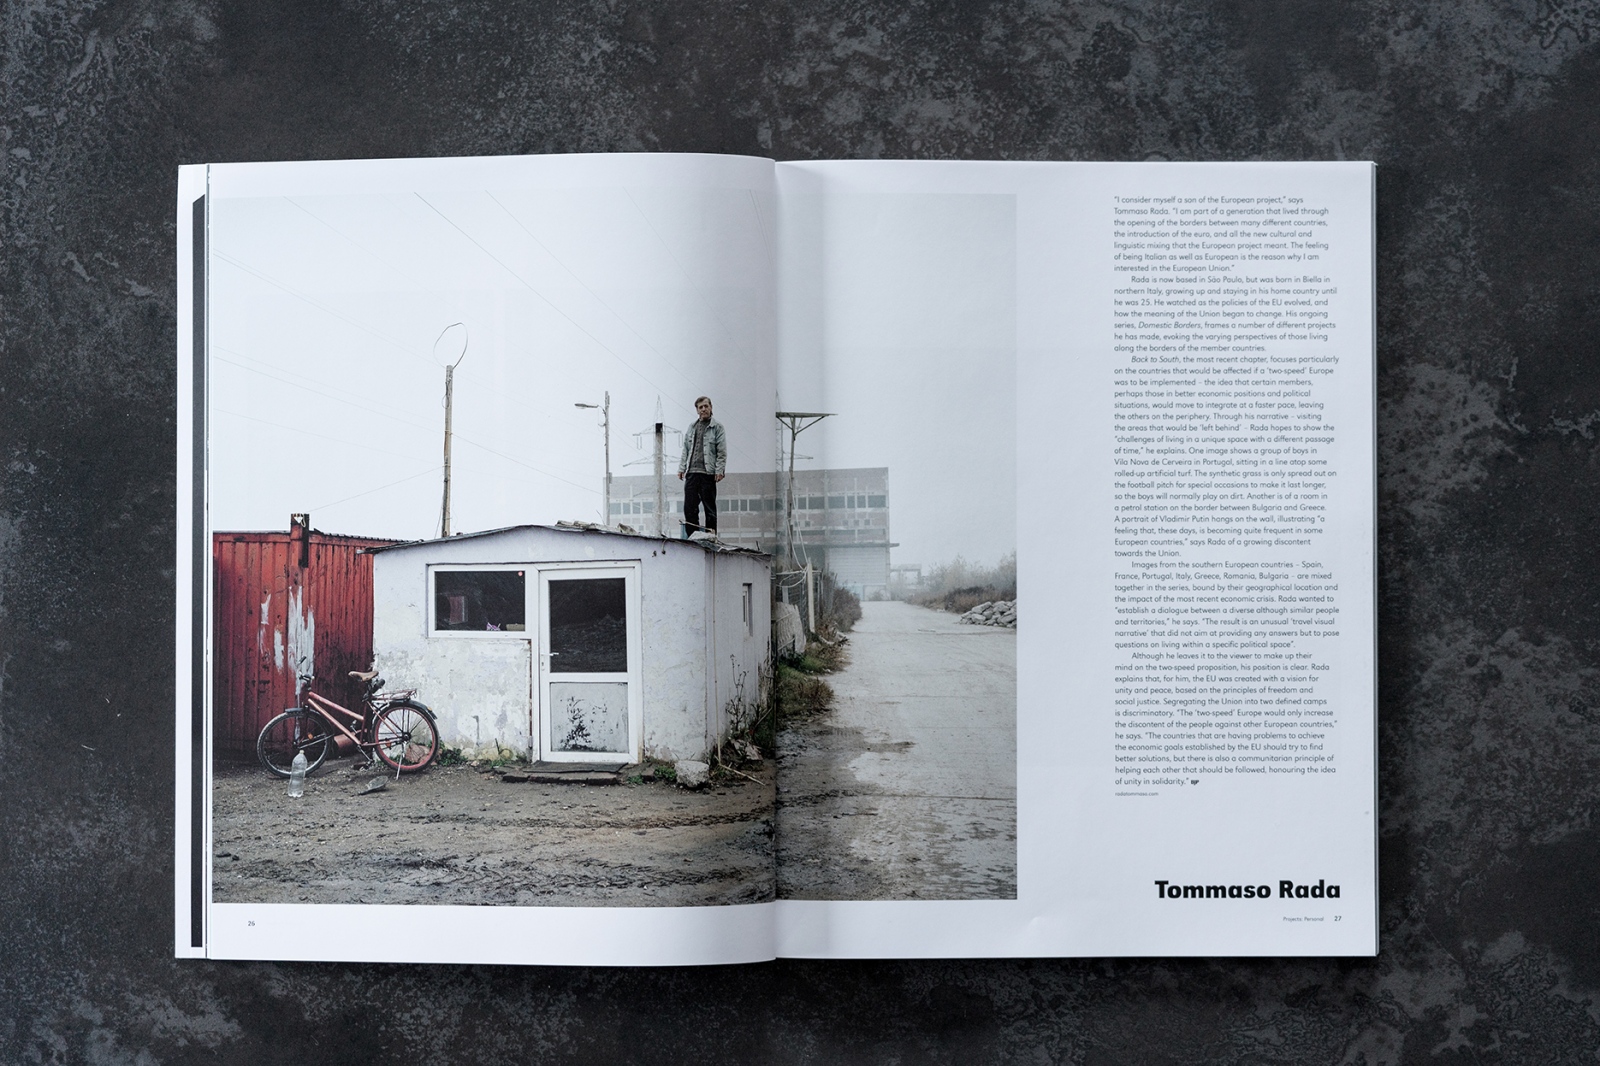 Back to South on British Journal of Photography